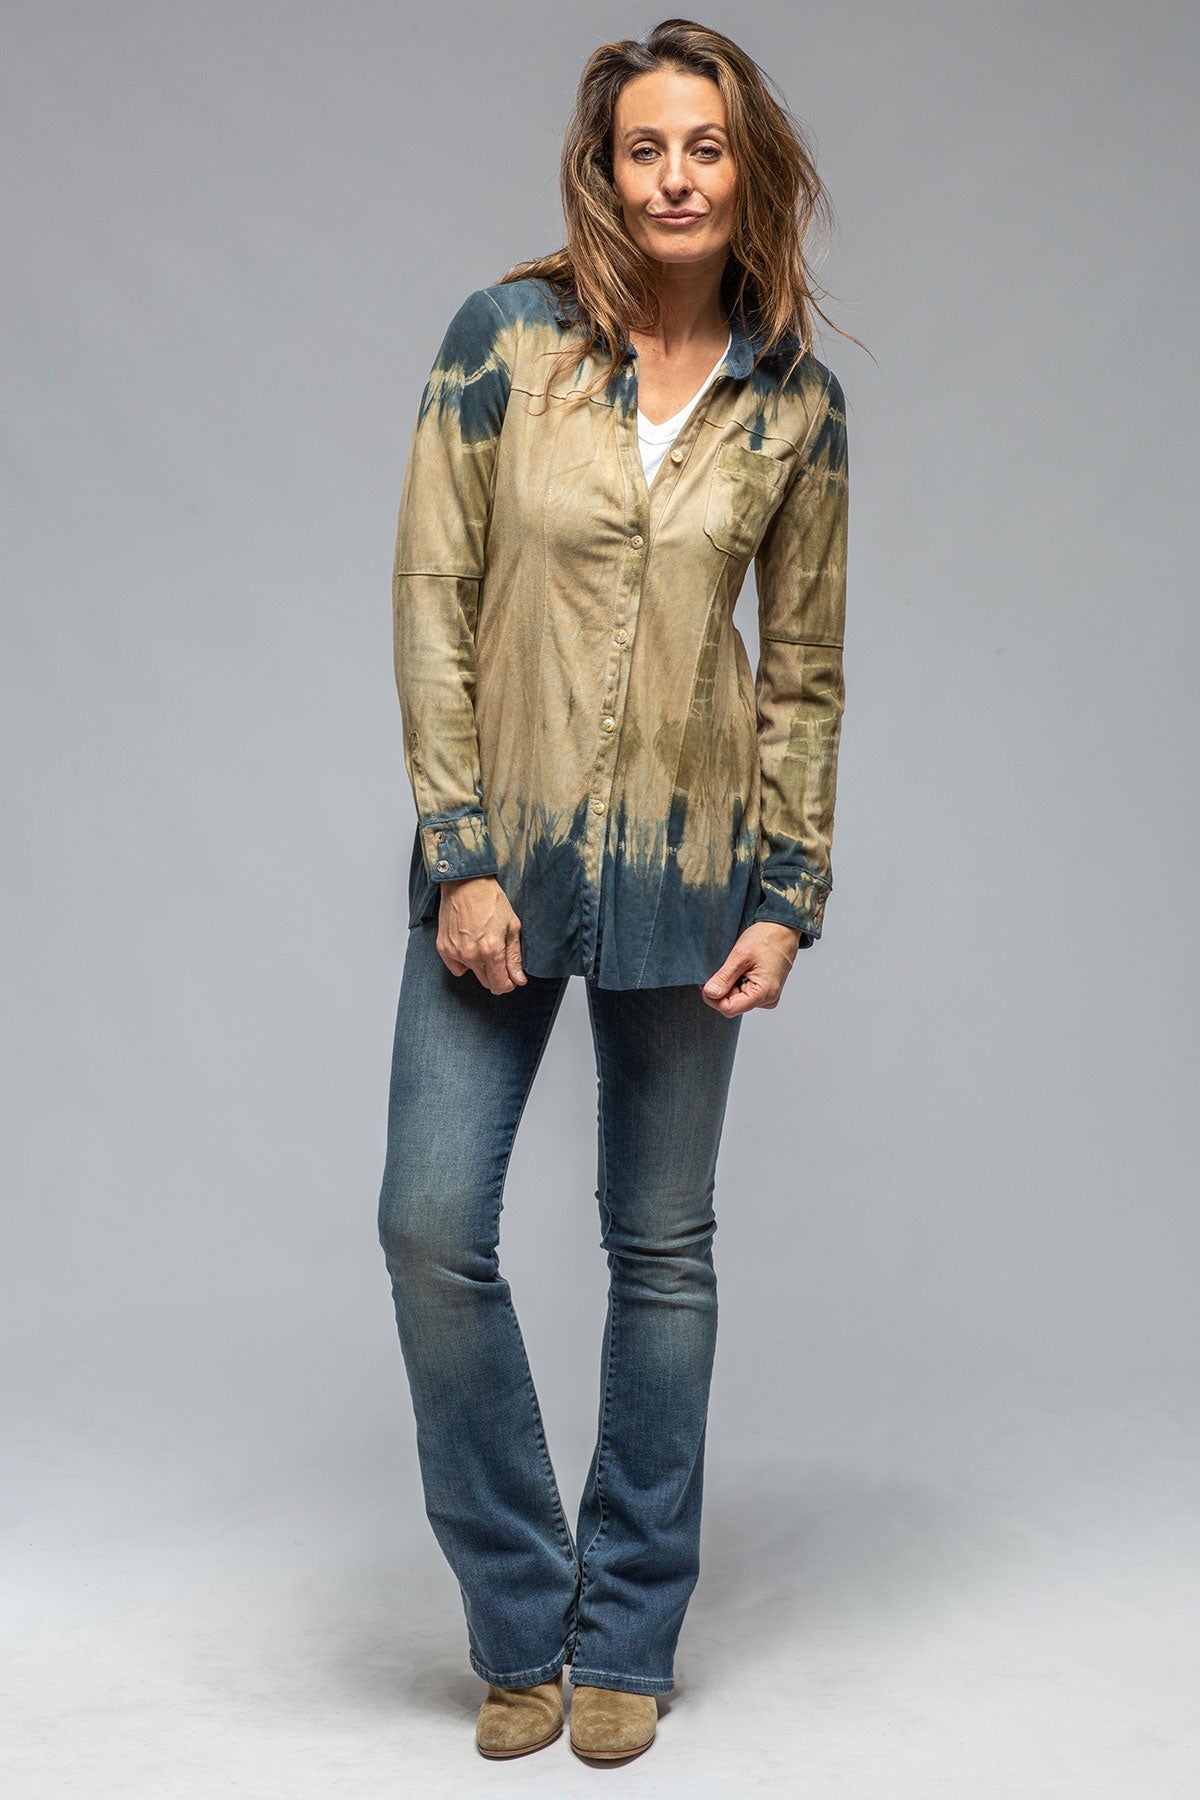 Olivia Canyon Tie Dye Long Suede Shirt | Ladies - Outerwear - Leather | Roncarati